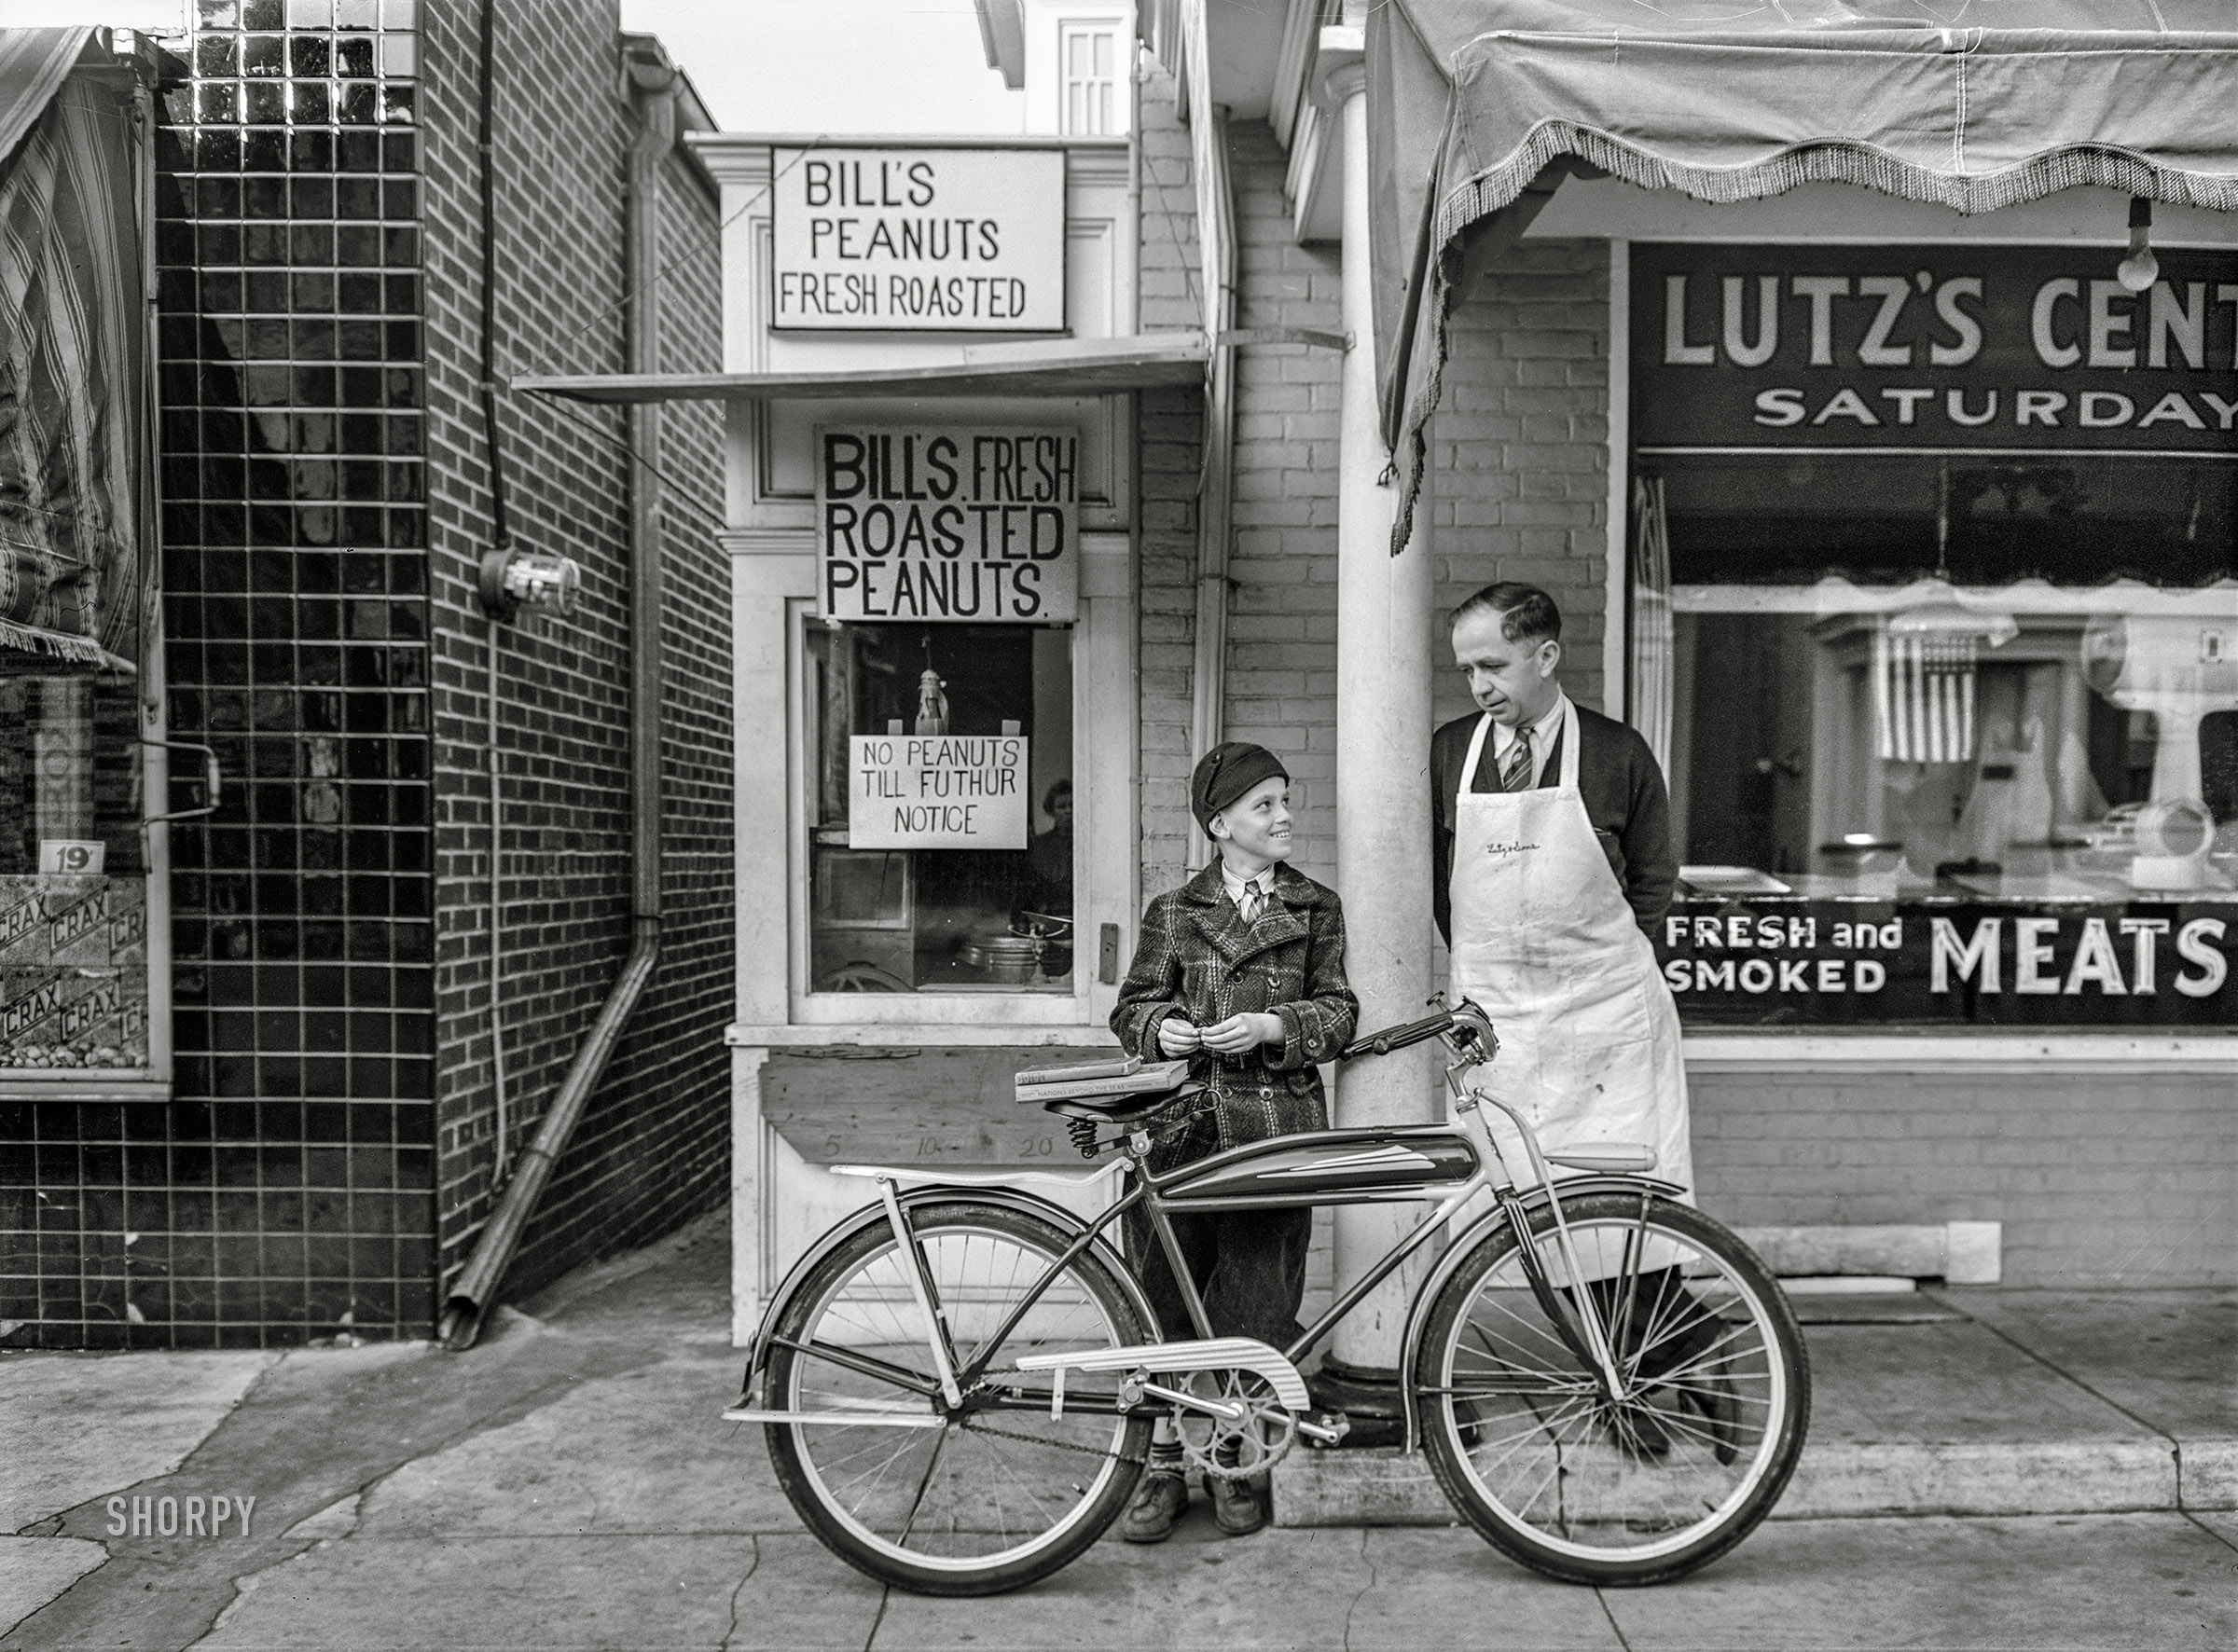 November 1942. Lititz, Pennsylvania. "Small town in wartime. Peanut stand next to the Lutz butcher shop finds it hard to get peanuts since the war started. Peanut oil is needed in industry." Acetate negative by Marjory Collins for the Office of War Information. View full size.